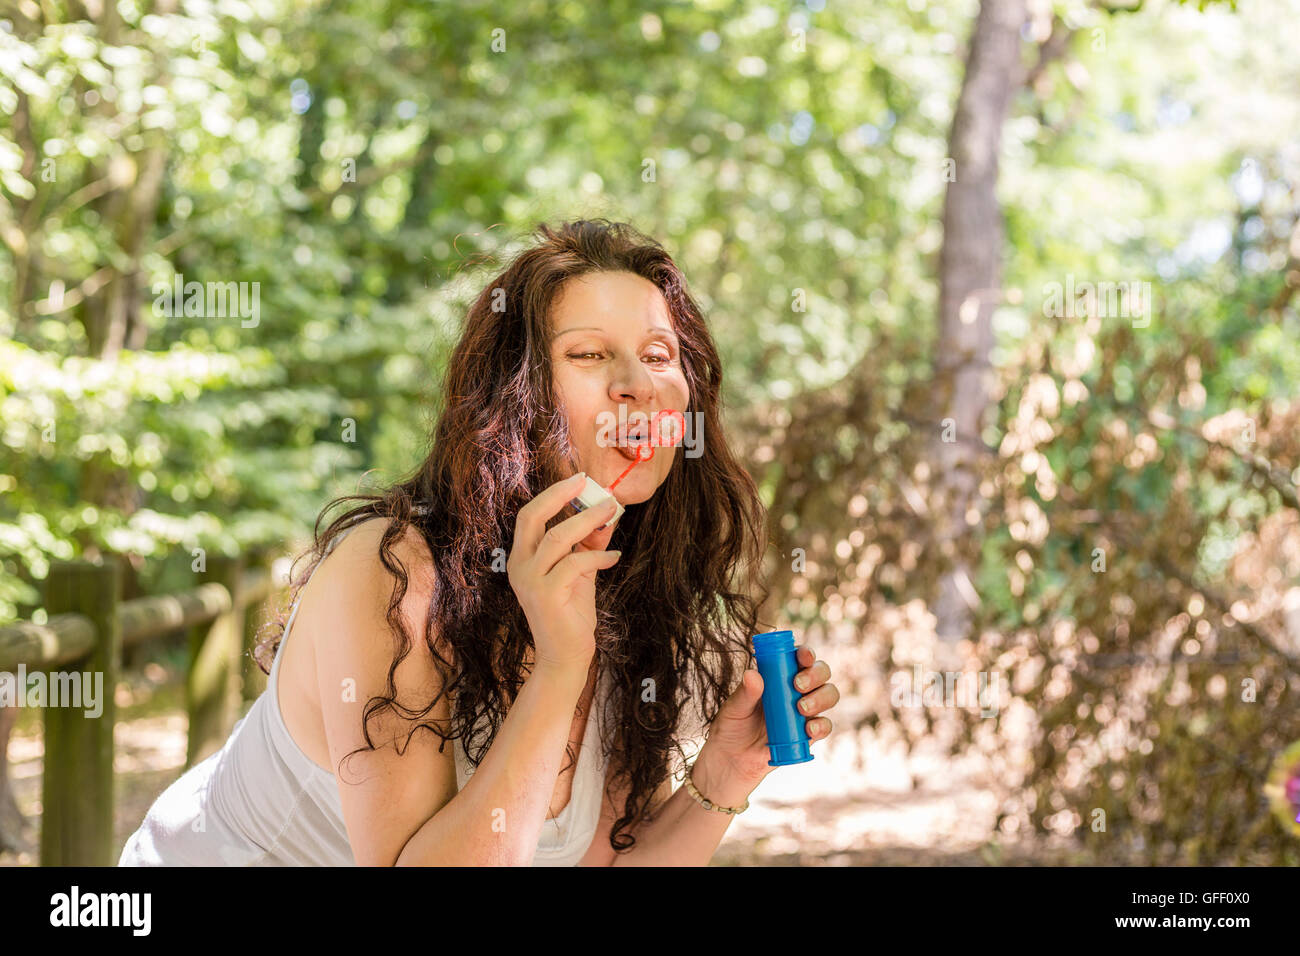 Fascinating mature adult woman is having fun like a little girl blowing soap bubbles in a public park Stock Photo